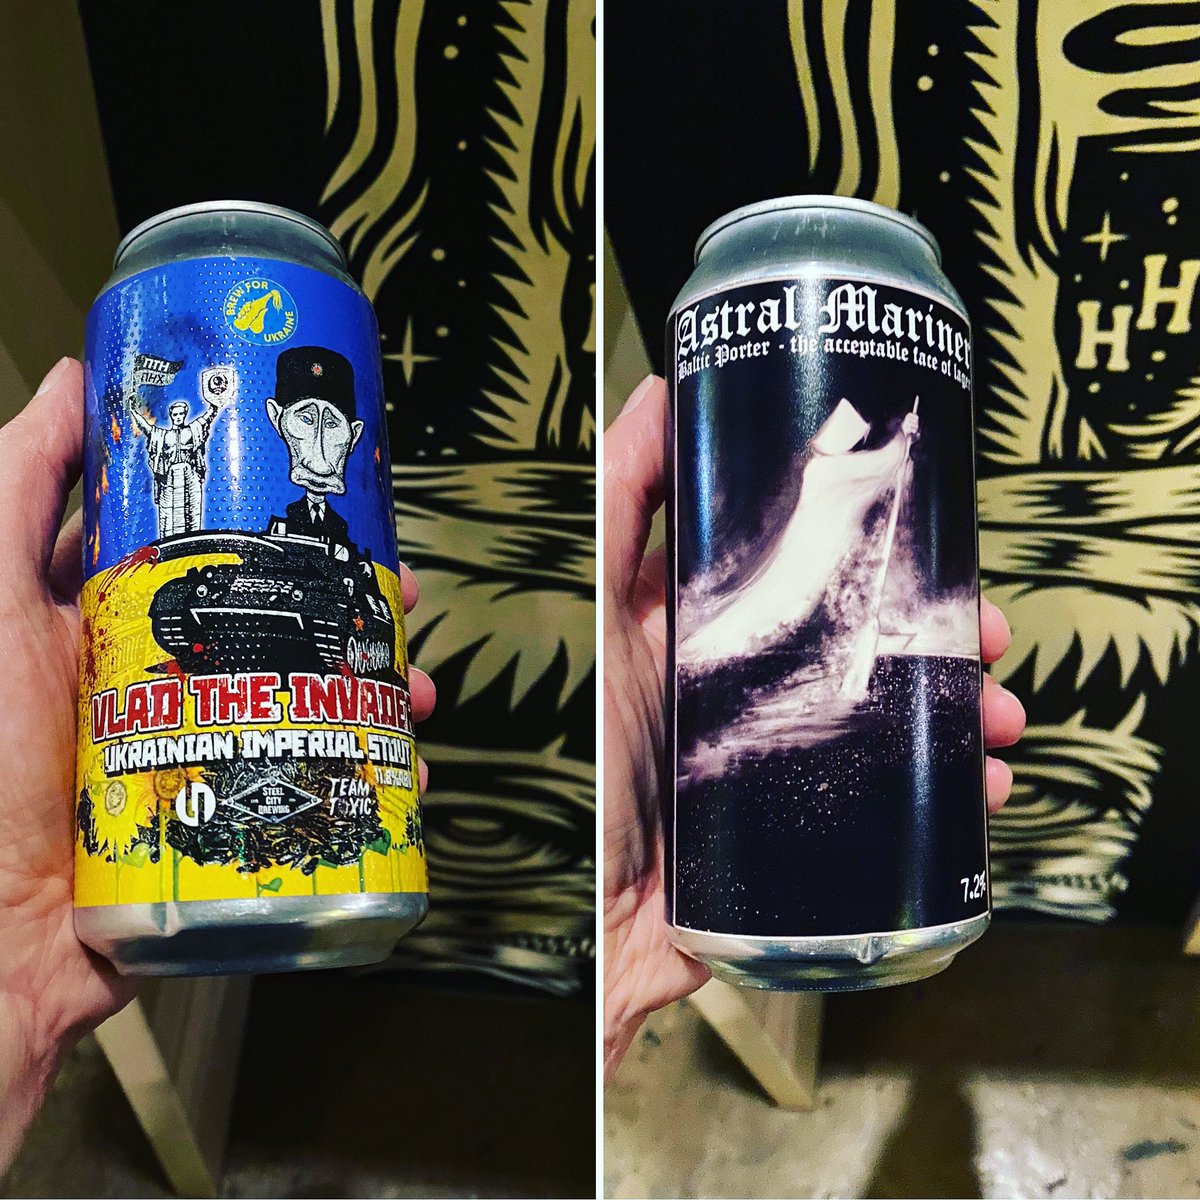 Two new @Steelcitybrew at #HopHideout ⤵️ 🍺 Baltic porter collab alongside Sheffield based Black Metal artist Ethereal Shroud - Astral Mariner. 💙💛 @brewforukraine initiative collab with @Lost_Industry & @TeamToxicLtd A Ukrainian Imperial Stout - Vlad The Invader.